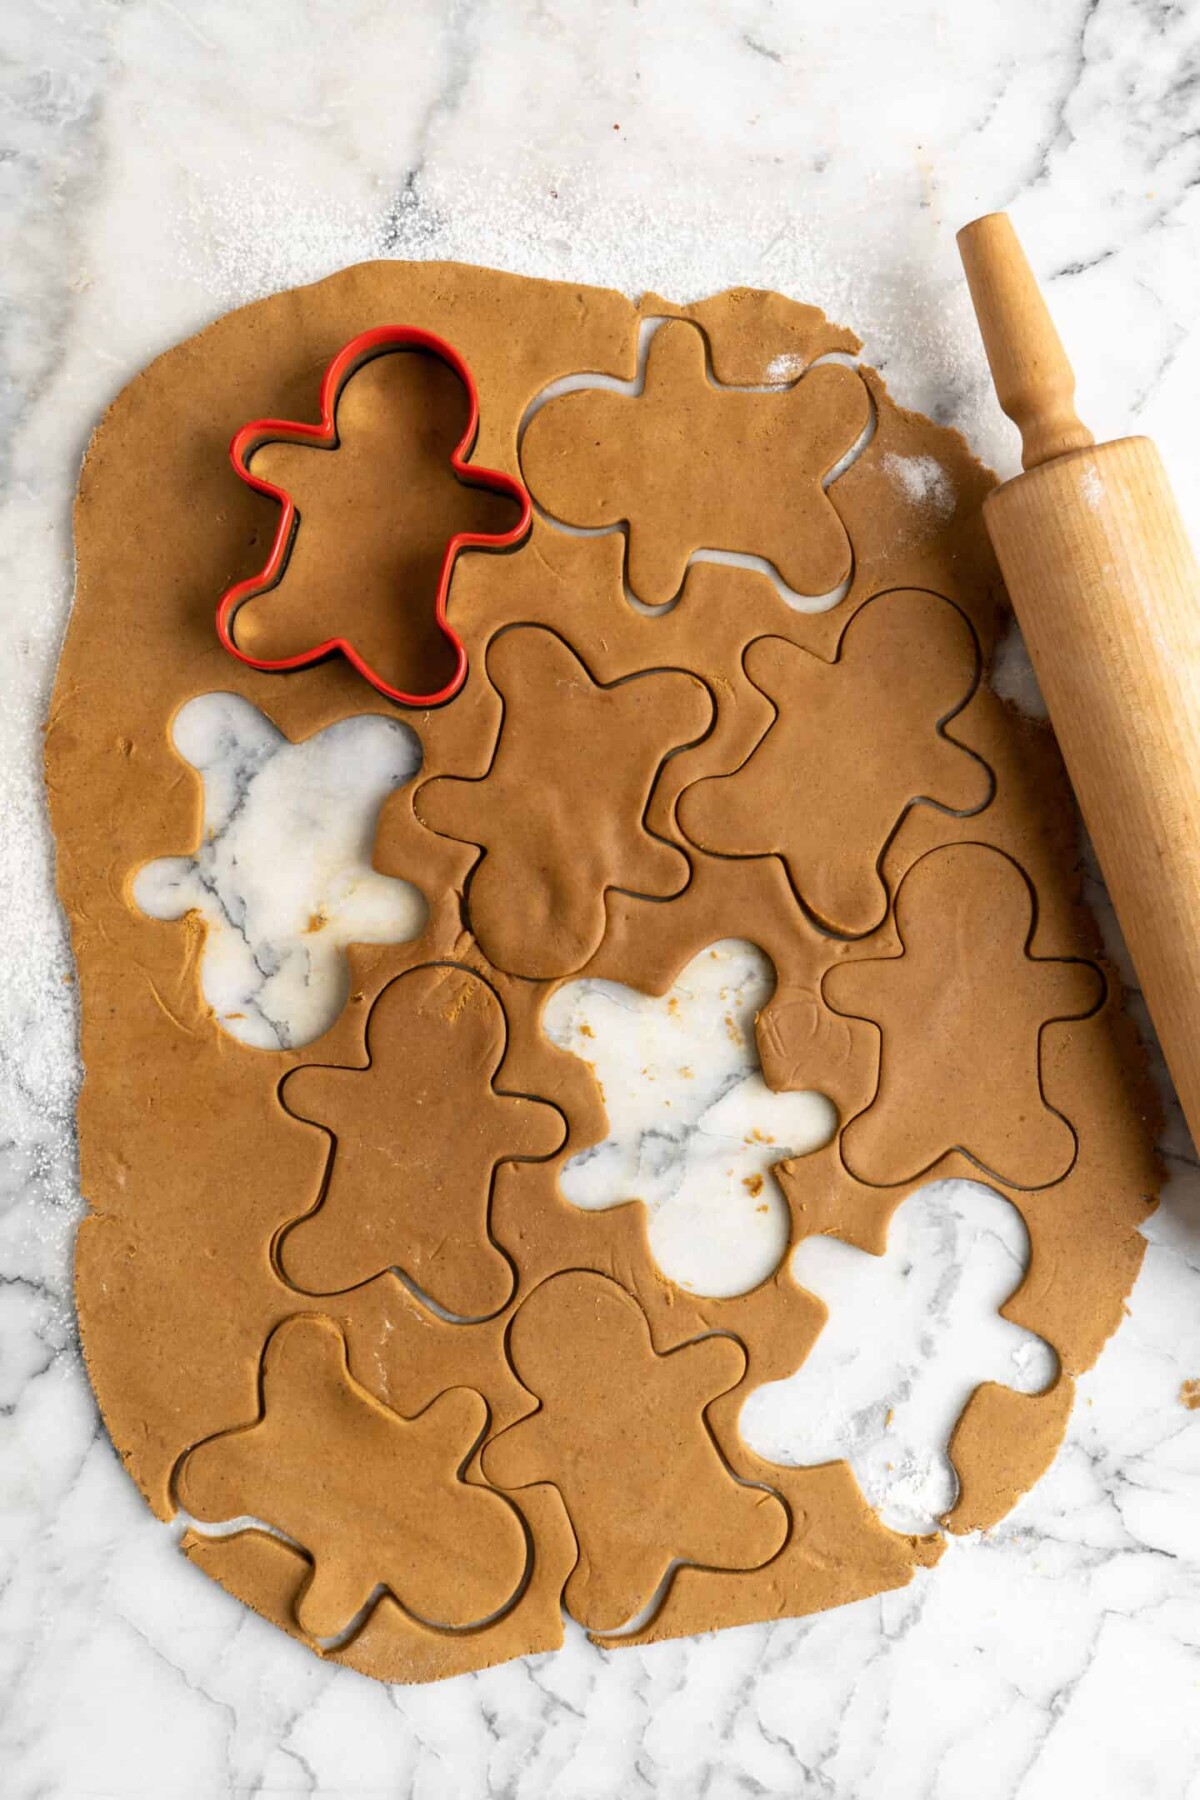 Rolled out gingerbread men dough with marks for a lot of gingerbread men to be cut out, and three gingerbread men already cut out, with a cookie cutter on top, and a rolling pin to the side